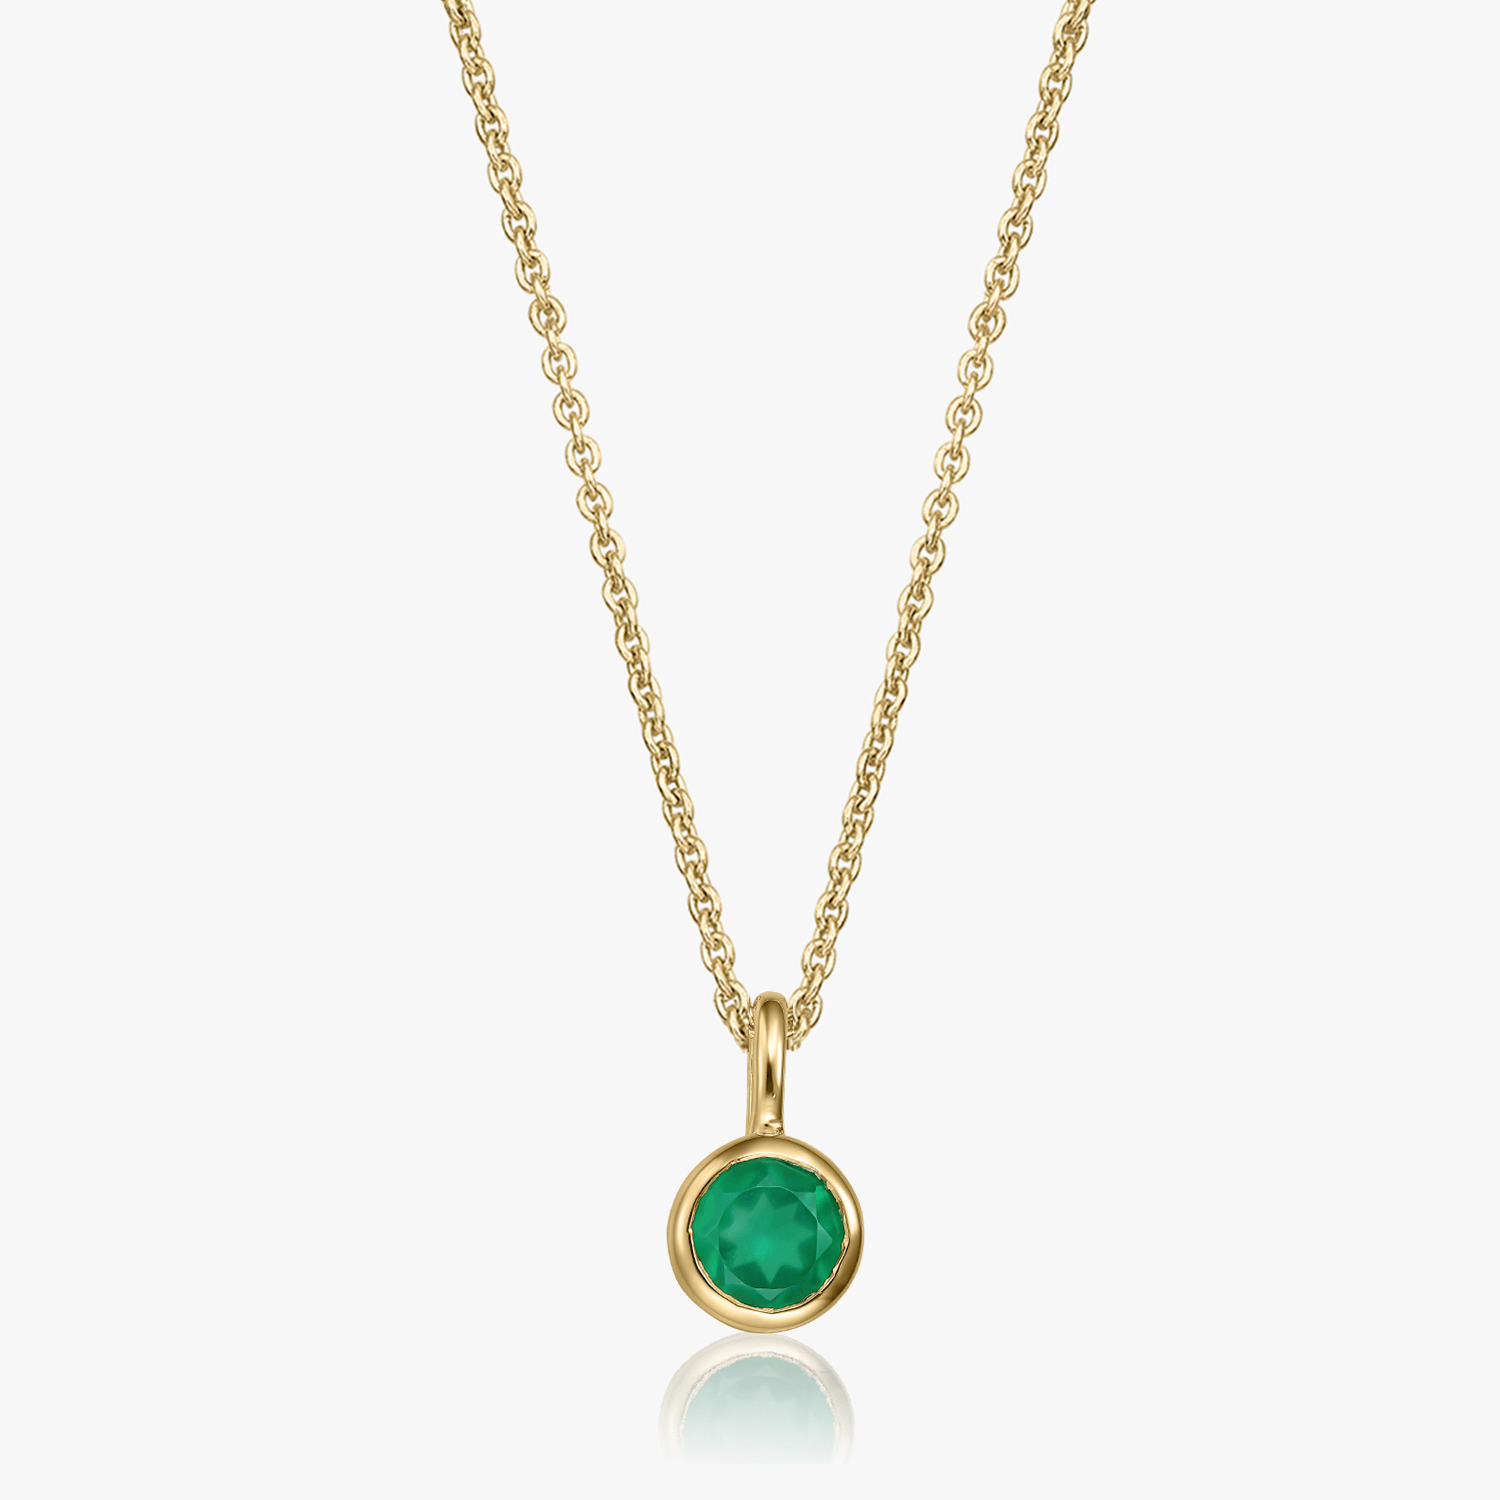 Birthstone Golden May silver necklace - Green Onyx